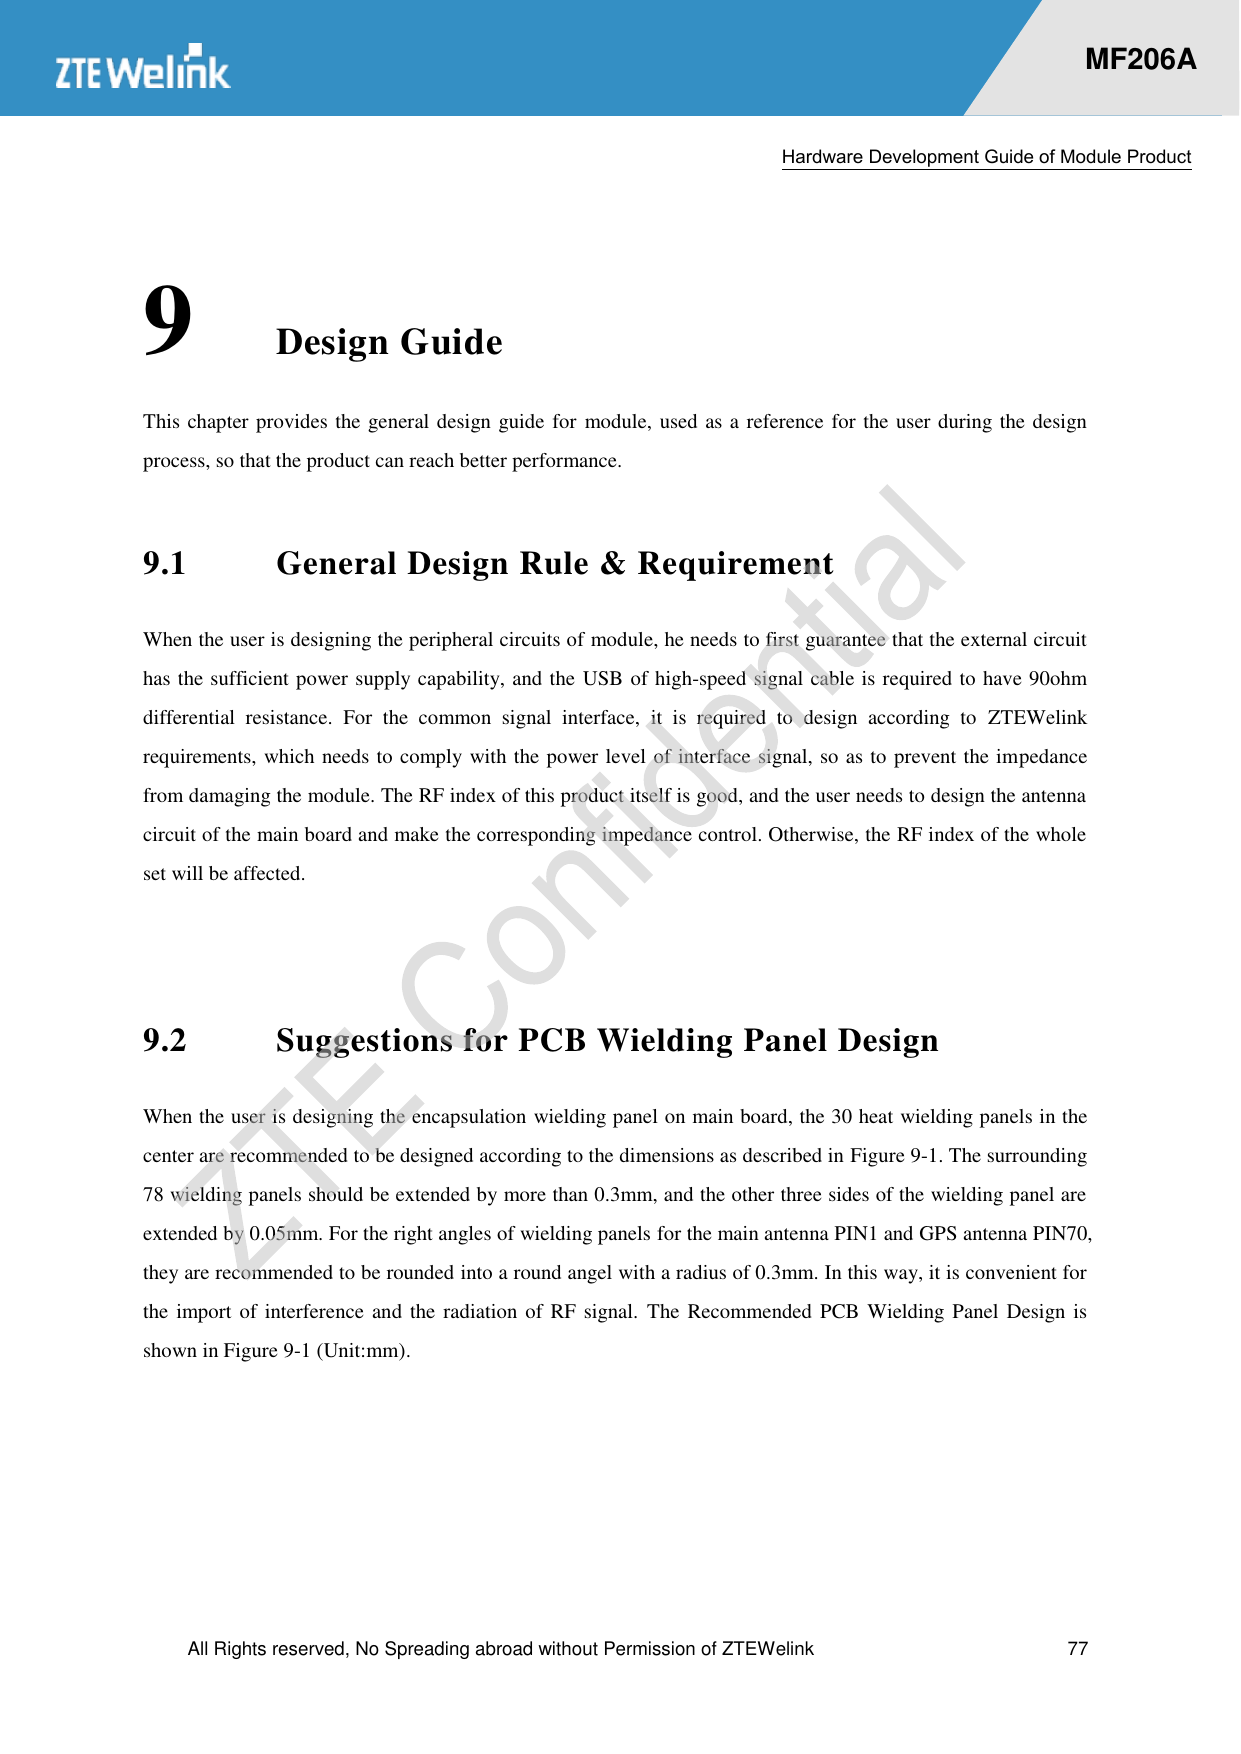  Hardware Development Guide of Module Product  All Rights reserved, No Spreading abroad without Permission of ZTEWelink  77    MF206A 9 Design Guide This chapter provides the general design guide for module, used as a reference for the user during the design process, so that the product can reach better performance.   9.1 General Design Rule &amp; Requirement When the user is designing the peripheral circuits of module, he needs to first guarantee that the external circuit has the sufficient power supply capability, and the USB of high-speed signal cable is required to have 90ohm differential  resistance.  For  the  common  signal  interface,  it  is  required  to  design  according  to  ZTEWelink requirements, which needs to comply with the power level of interface signal, so as to prevent the impedance from damaging the module. The RF index of this product itself is good, and the user needs to design the antenna circuit of the main board and make the corresponding impedance control. Otherwise, the RF index of the whole set will be affected.    9.2 Suggestions for PCB Wielding Panel Design When the user is designing the encapsulation wielding panel on main board, the 30 heat wielding panels in the center are recommended to be designed according to the dimensions as described in Figure 9-1. The surrounding 78 wielding panels should be extended by more than 0.3mm, and the other three sides of the wielding panel are extended by 0.05mm. For the right angles of wielding panels for the main antenna PIN1 and GPS antenna PIN70, they are recommended to be rounded into a round angel with a radius of 0.3mm. In this way, it is convenient for the import of interference and the radiation of RF signal.  The  Recommended PCB Wielding Panel Design is shown in Figure 9-1 (Unit:mm). 